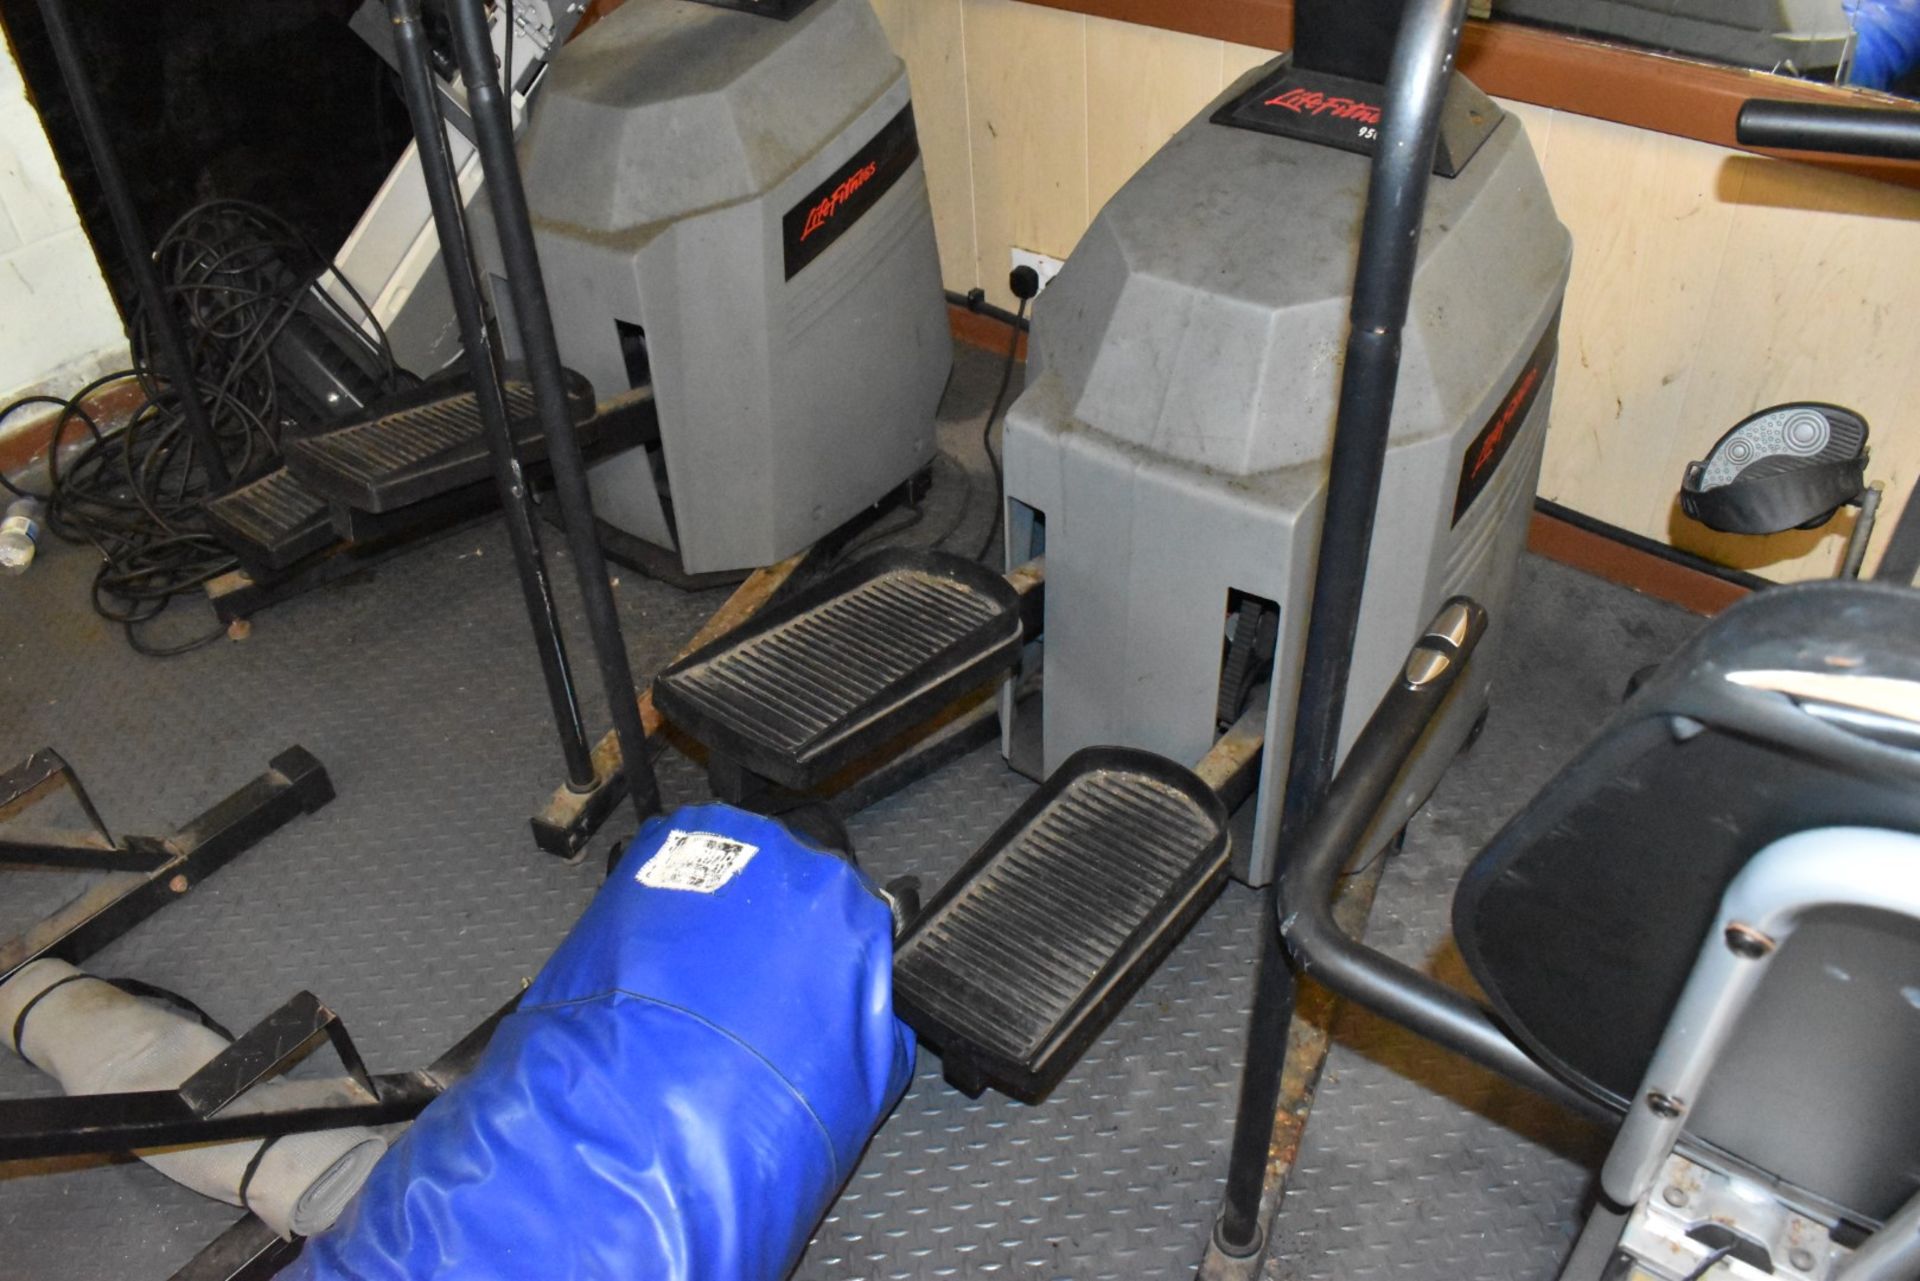 Contents of Bodybuilding and Strongman Gym - Includes Approx 30 Pieces of Gym Equipment, Floor Mats, - Image 71 of 95